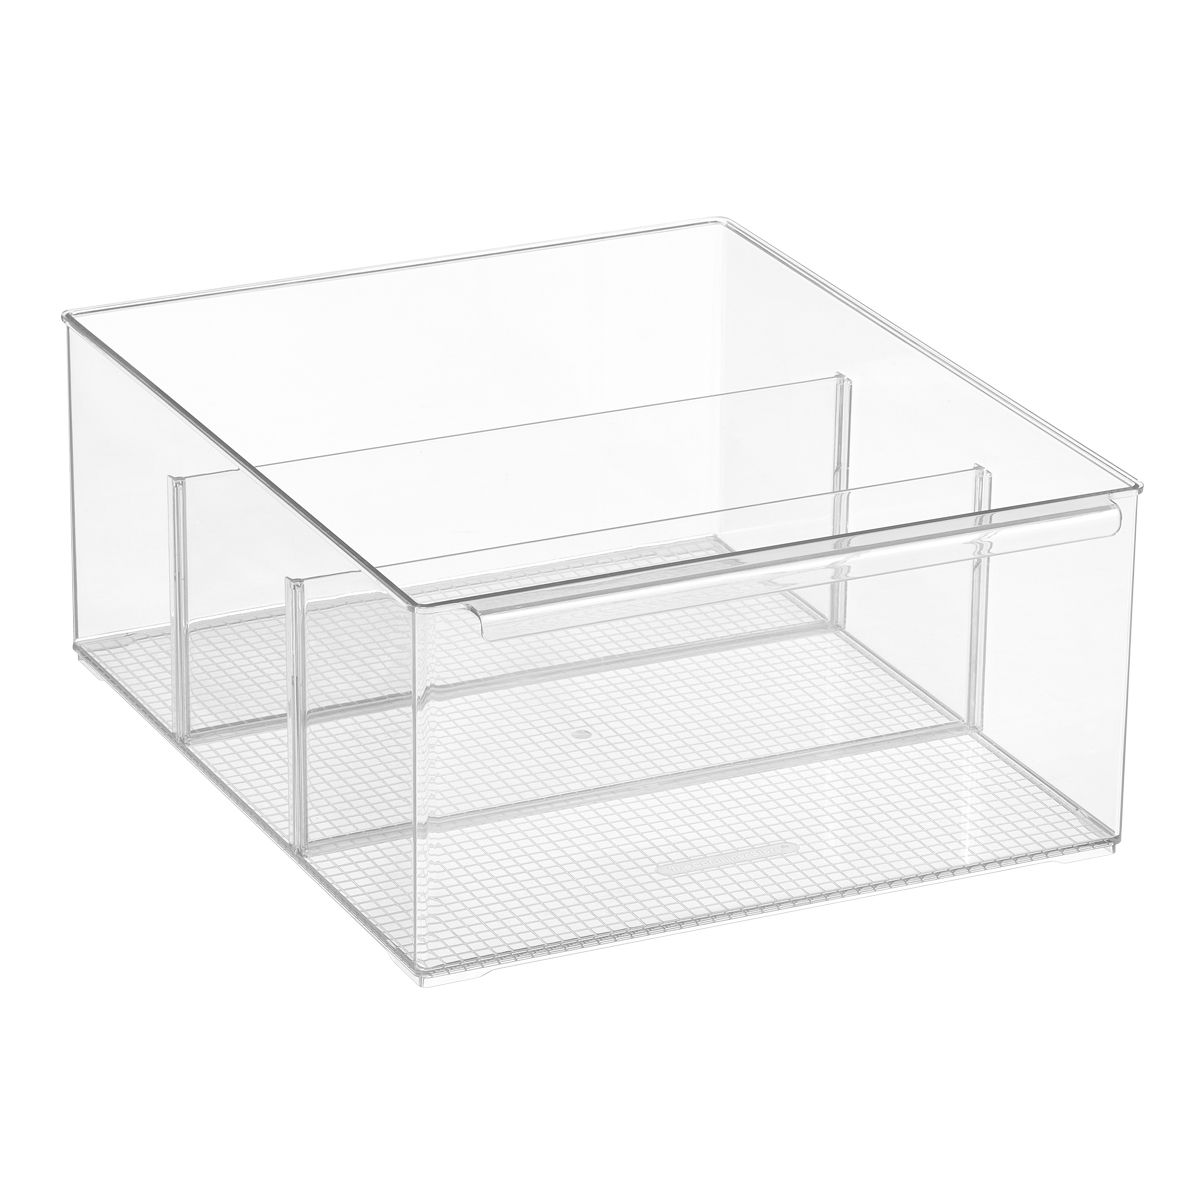 Everything Organizer XL Shelf Depth Pantry Bin w/ Dividers Clear | The Container Store